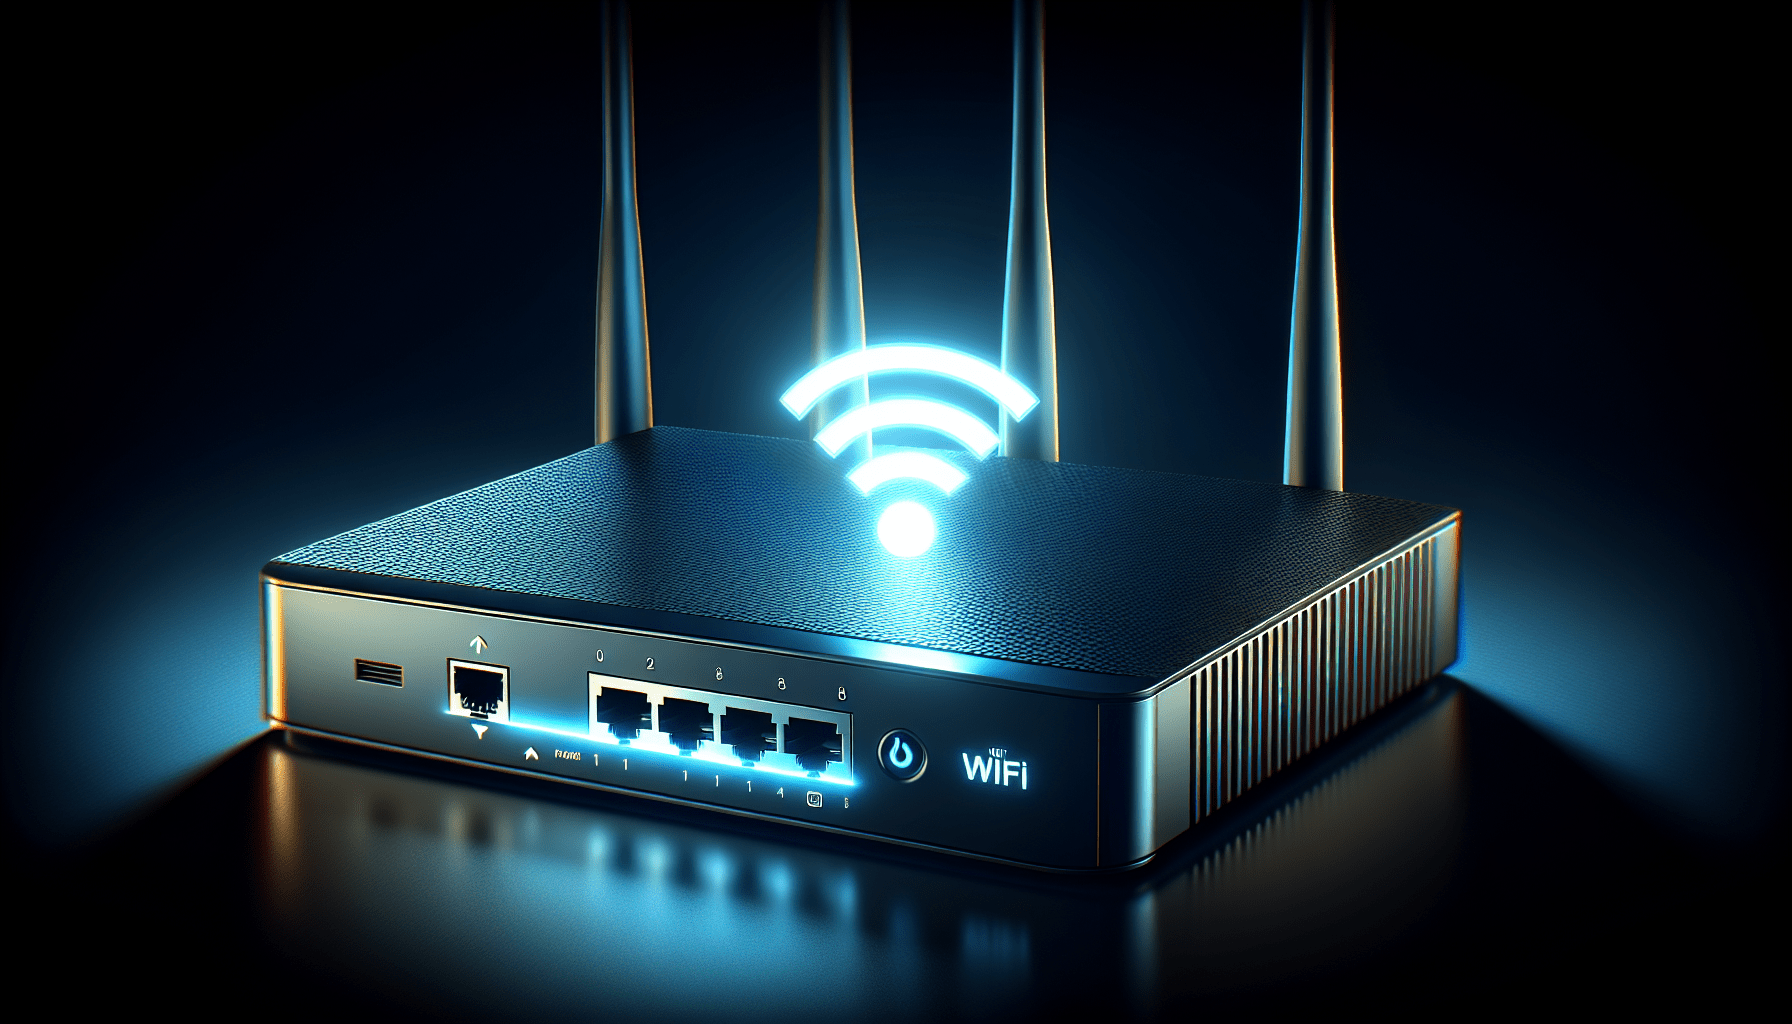 Setting up a guest network on your router: A step-by-step guide